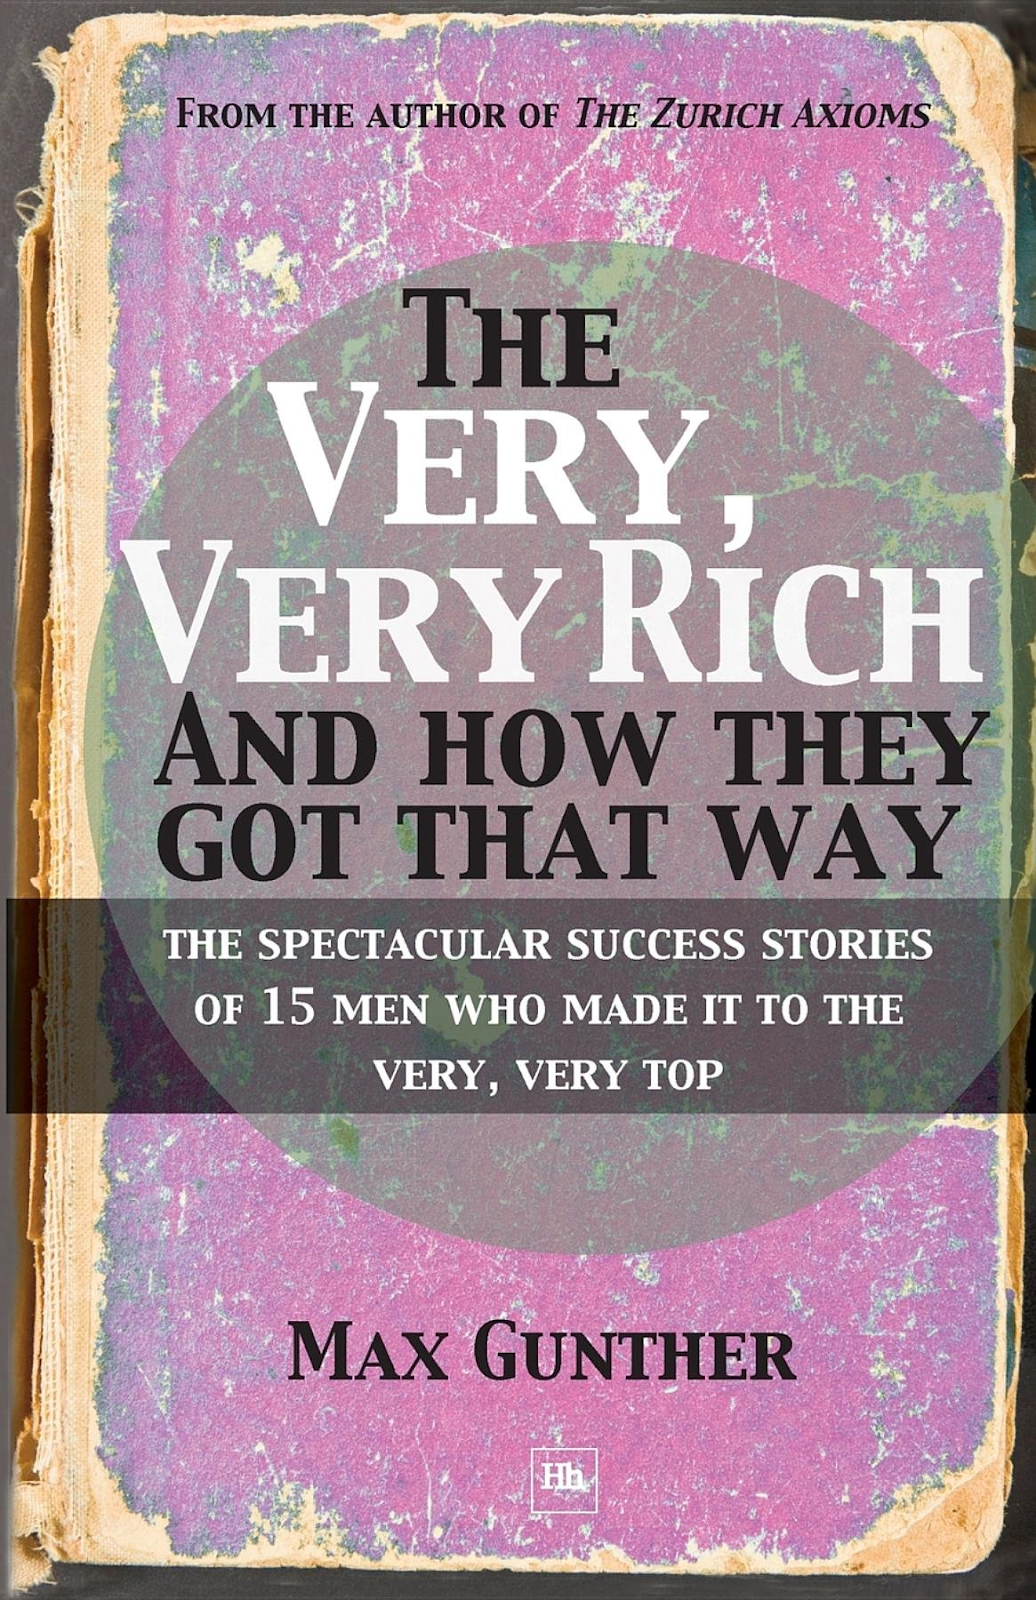 Book 'The Very, Very Rich and How They Got That Way'.